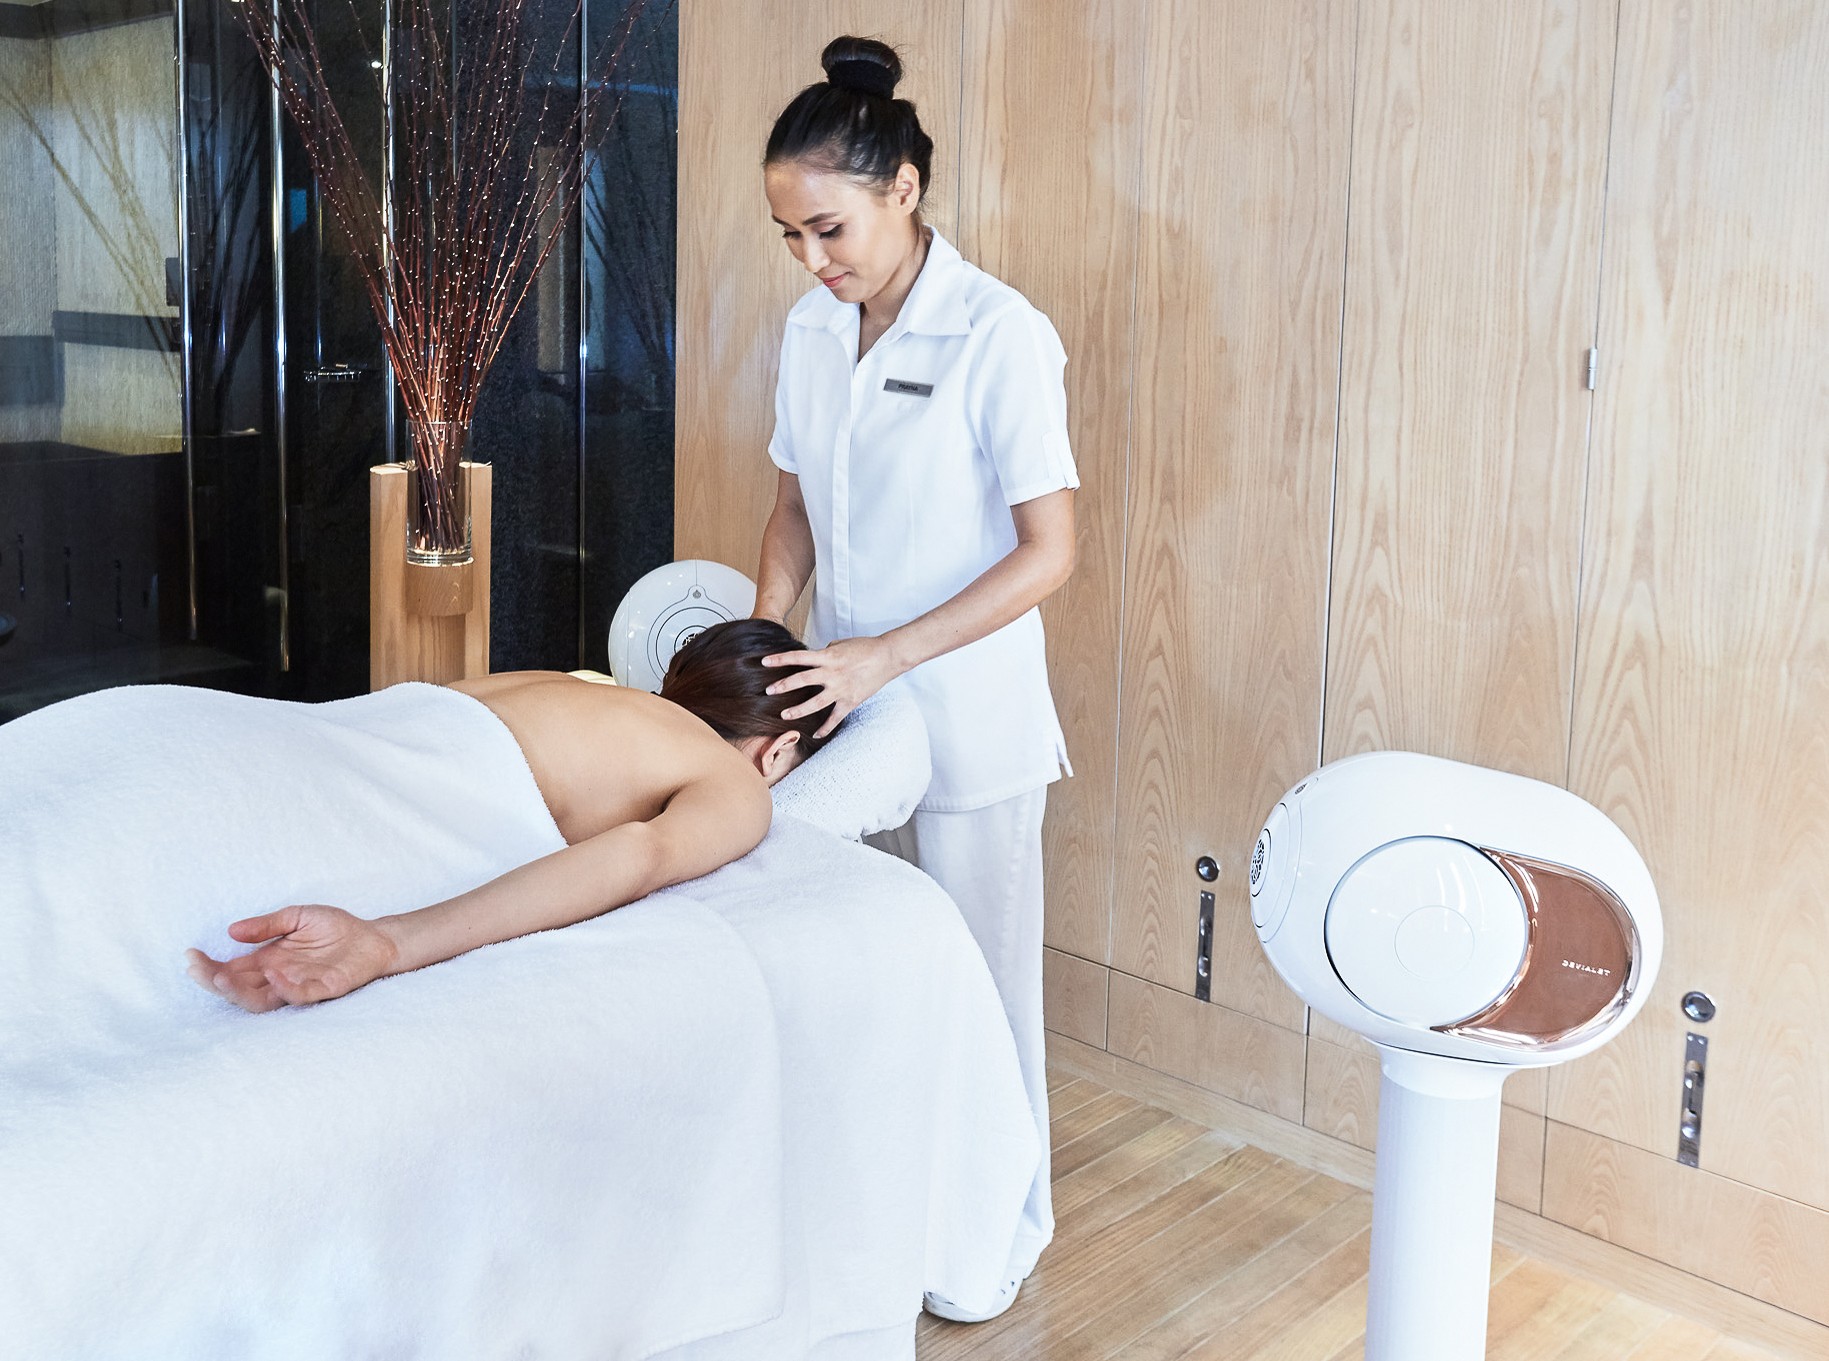 At the Plateau Spa in the Grand Hyatt, you are transported on a ‘Voyage des Sens’ experience.